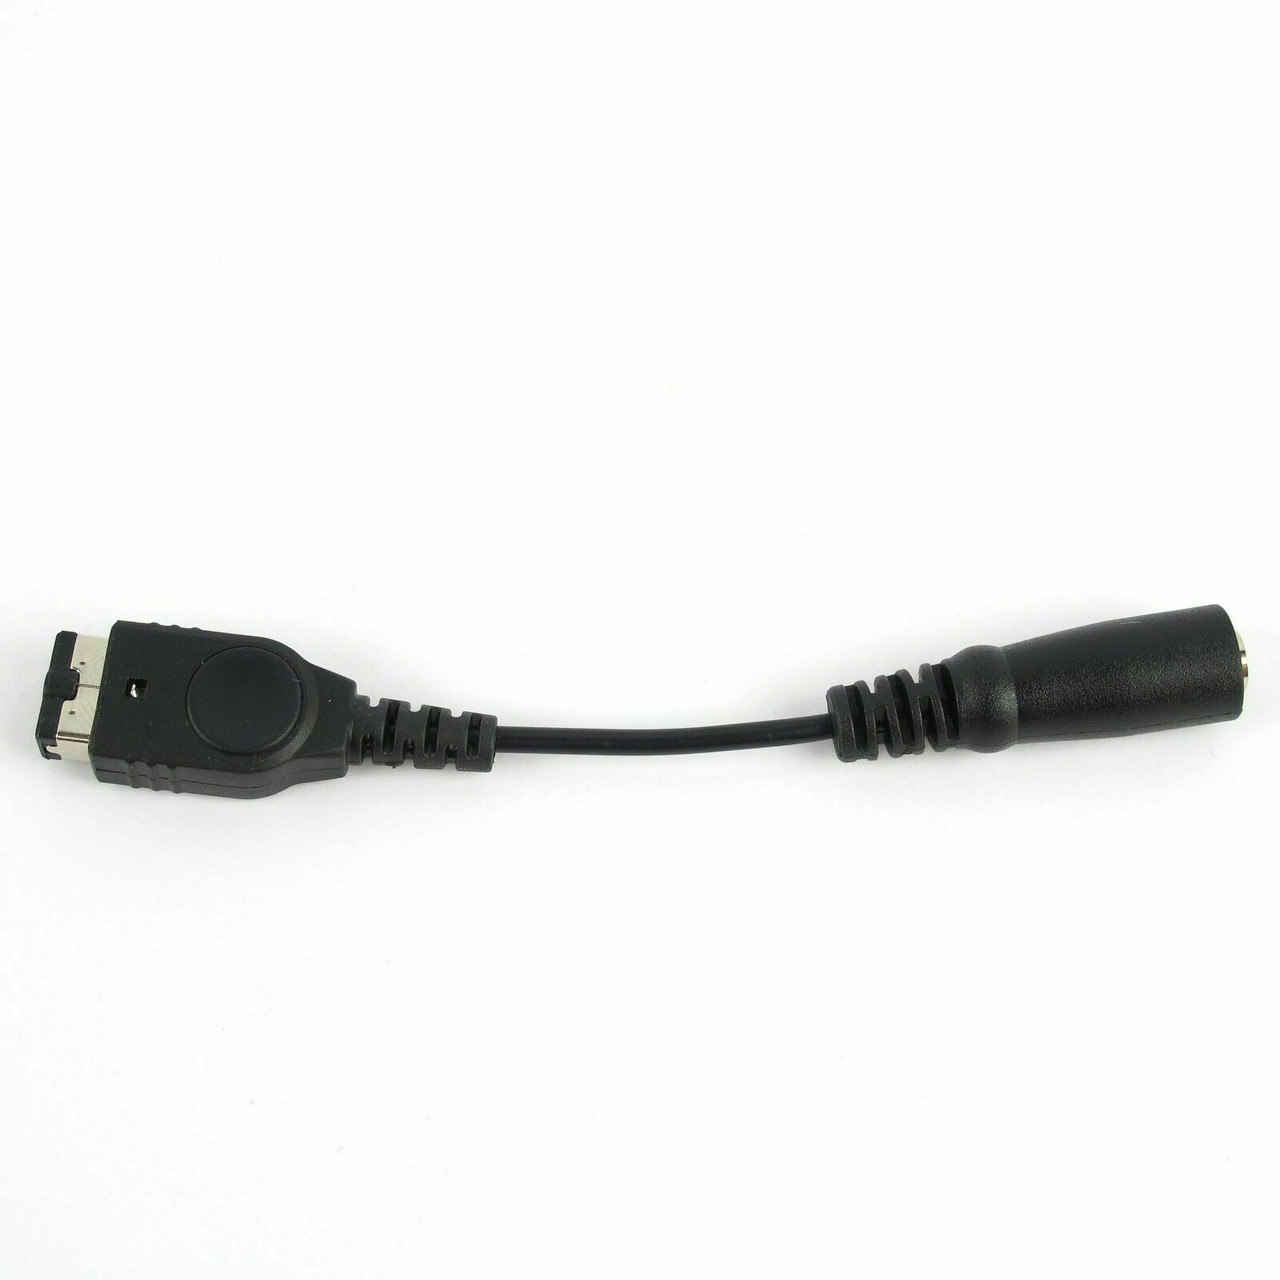 3.5MM Headphone Earphone Jack Adapter Cord Cable For Gameboy Advance GBA-SP A202